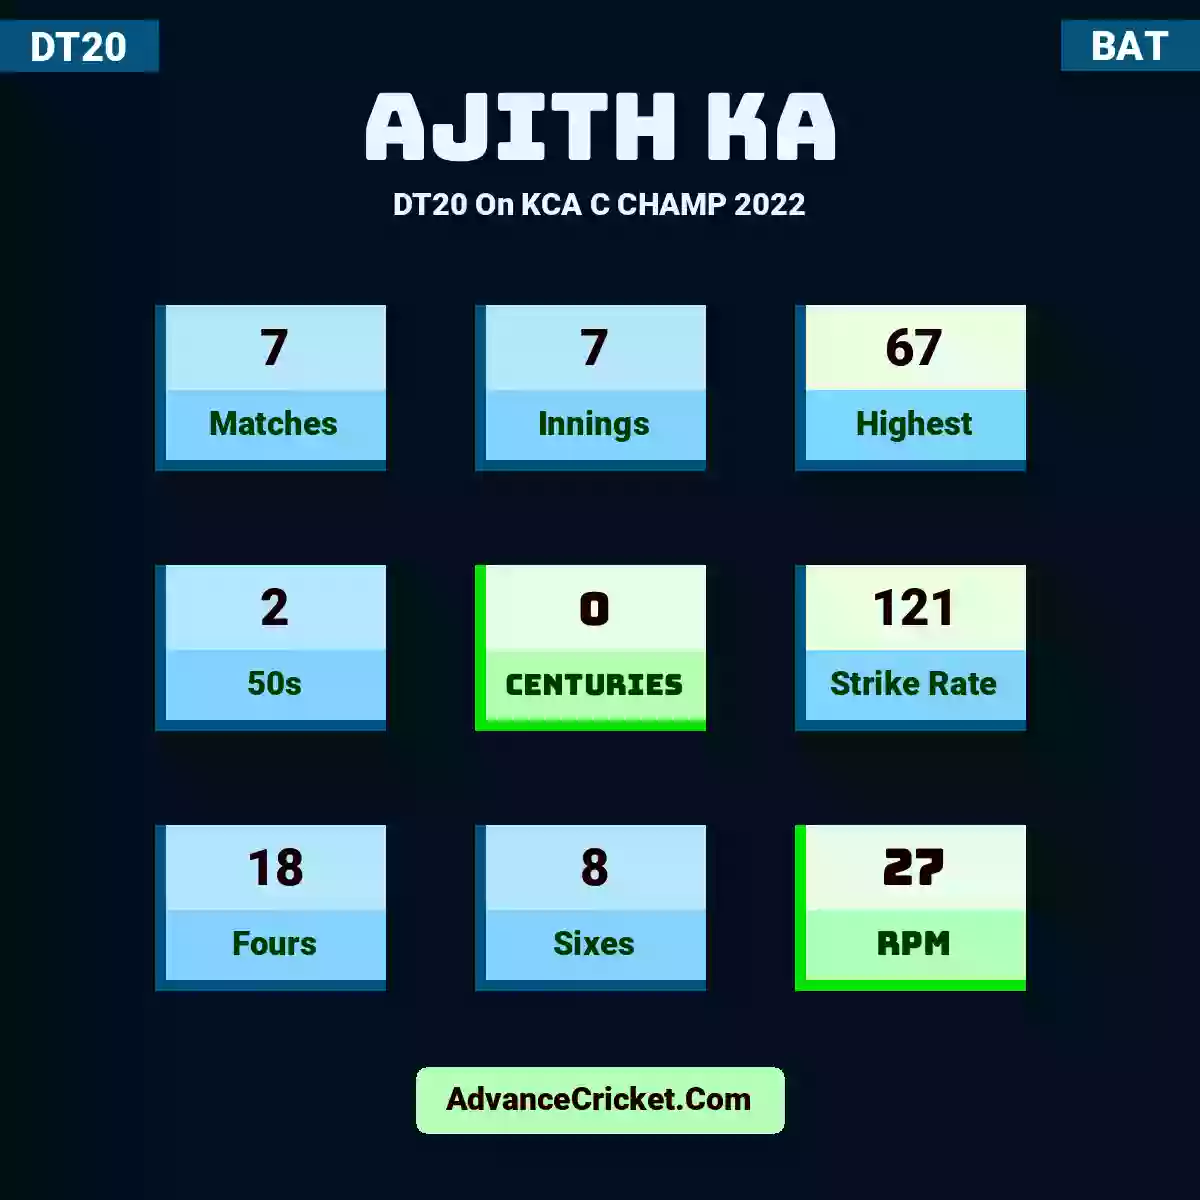 Ajith KA DT20  On KCA C CHAMP 2022, Ajith KA played 7 matches, scored 67 runs as highest, 2 half-centuries, and 0 centuries, with a strike rate of 121. A.KA hit 18 fours and 8 sixes, with an RPM of 27.